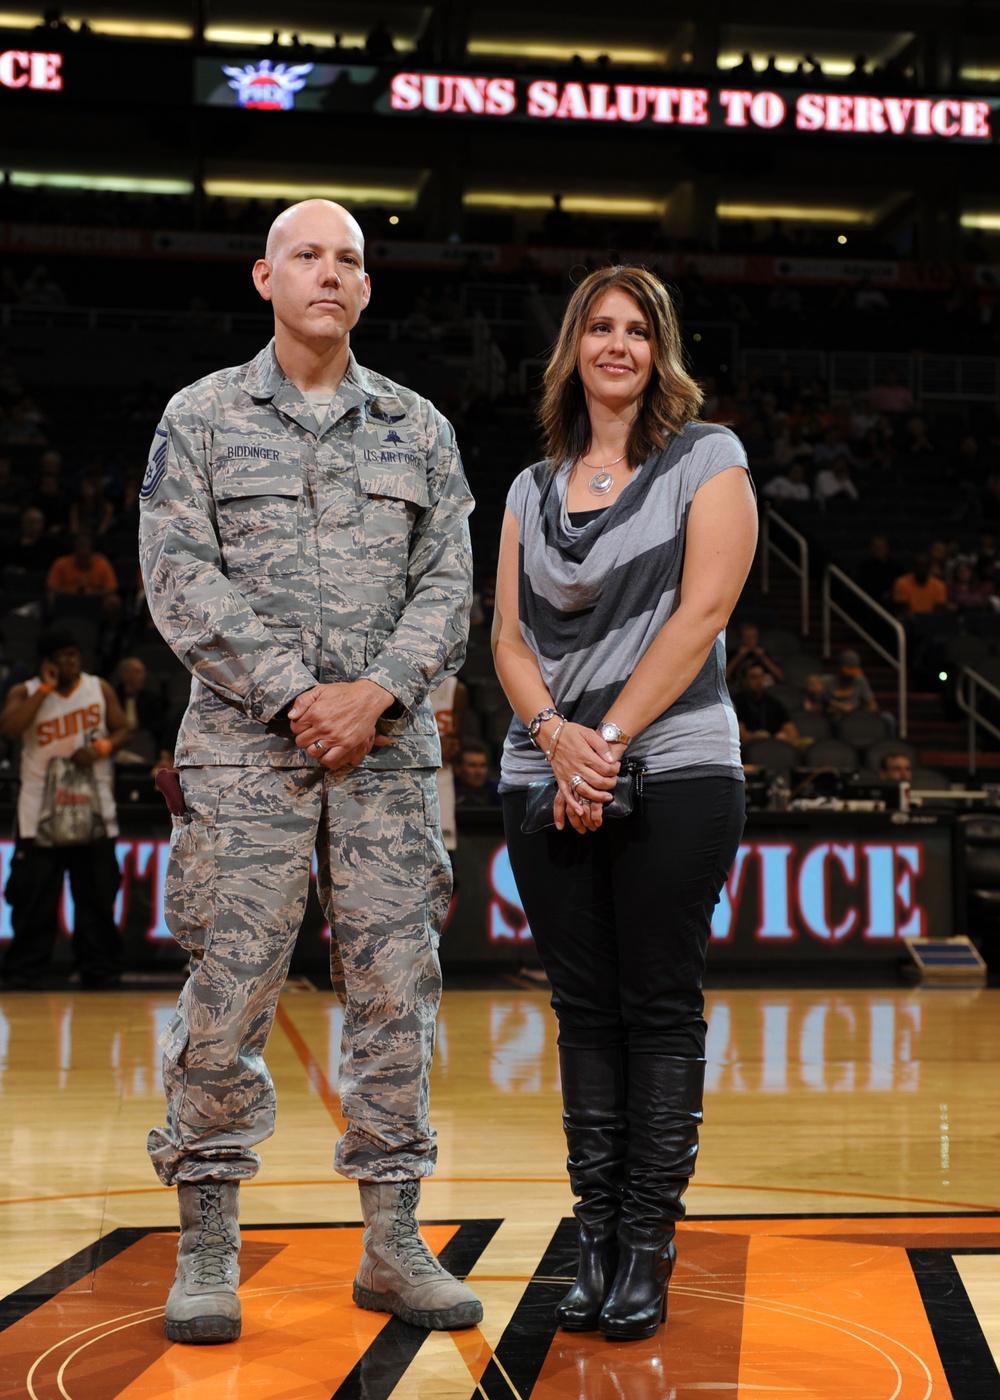 D-M airmen honored during Phoenix Suns game